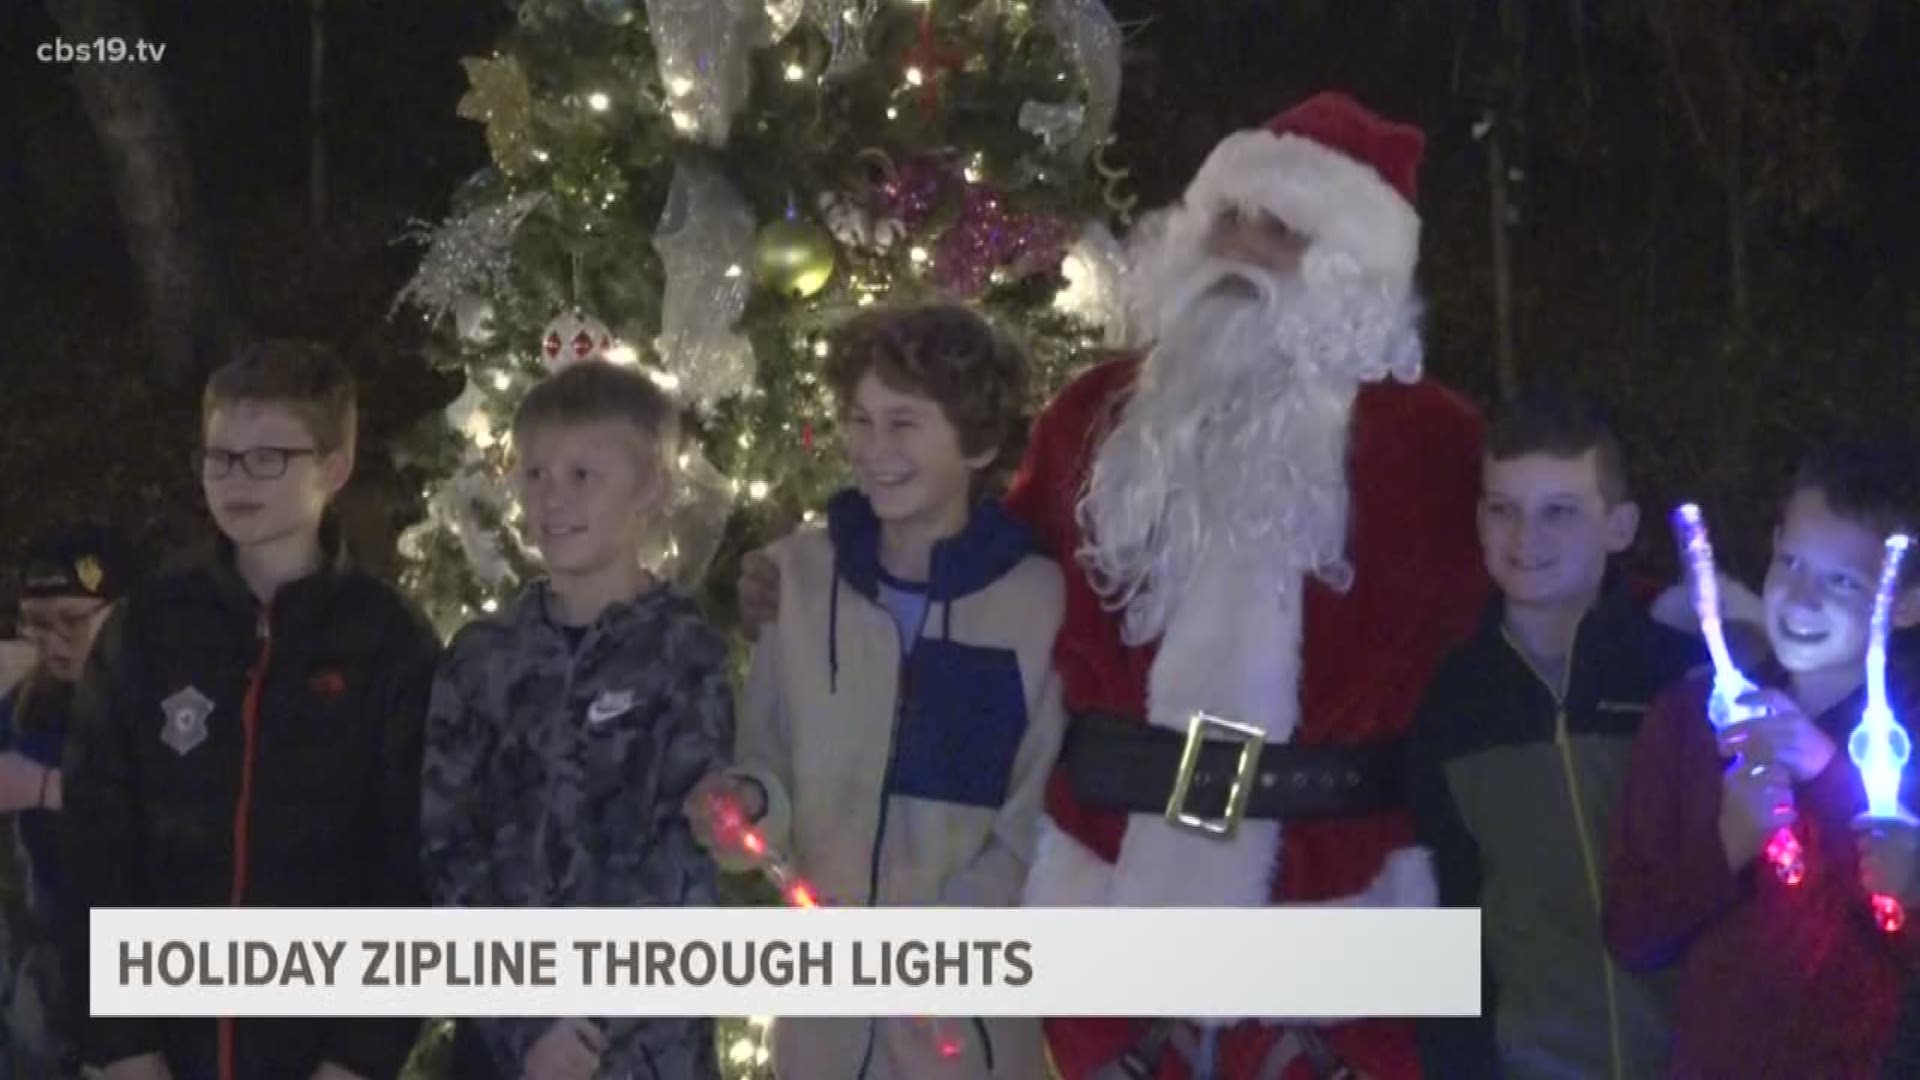 Thomas Falls in Diana is helping folks celebrate the holidays with their annual zipline through lights.